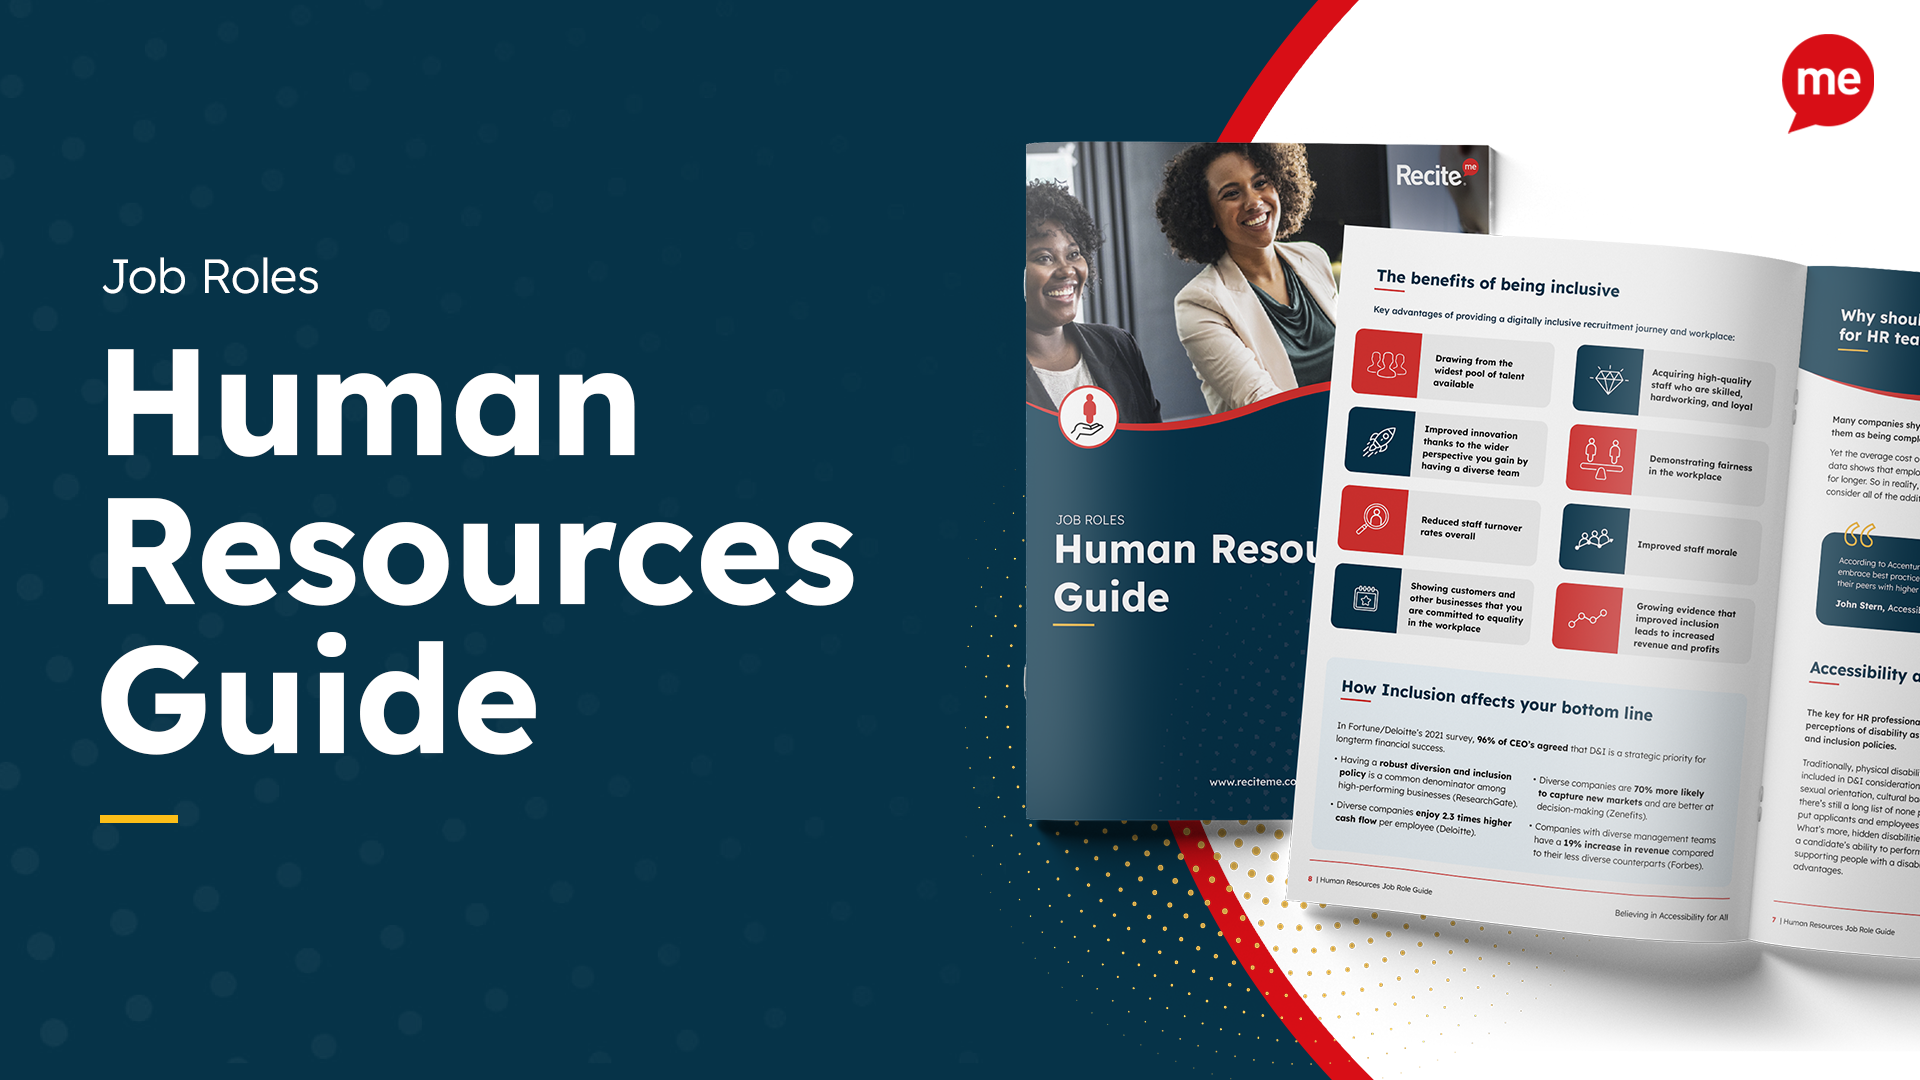 Human Resources Guide